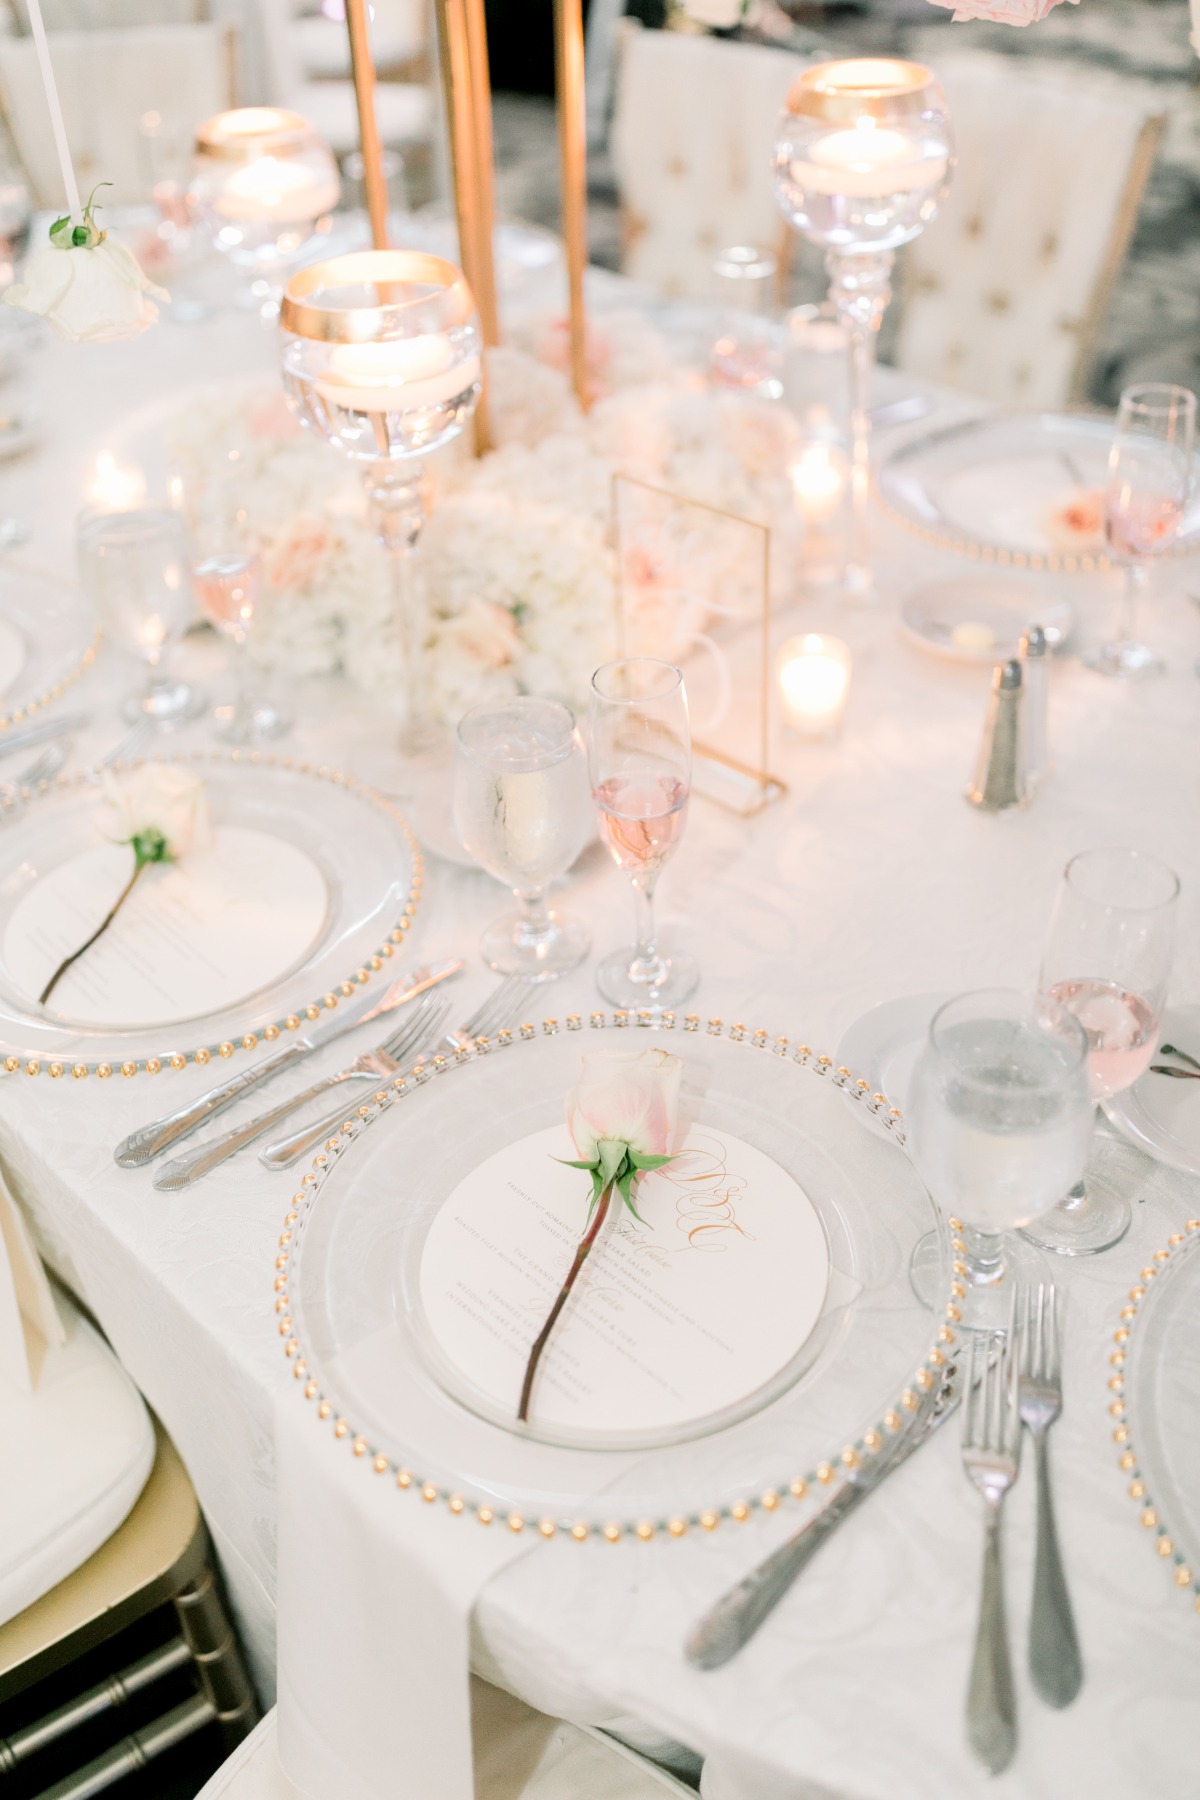 Over the Top Greek Wedding Drenched in Florals at the Grand Marquis New Jersey